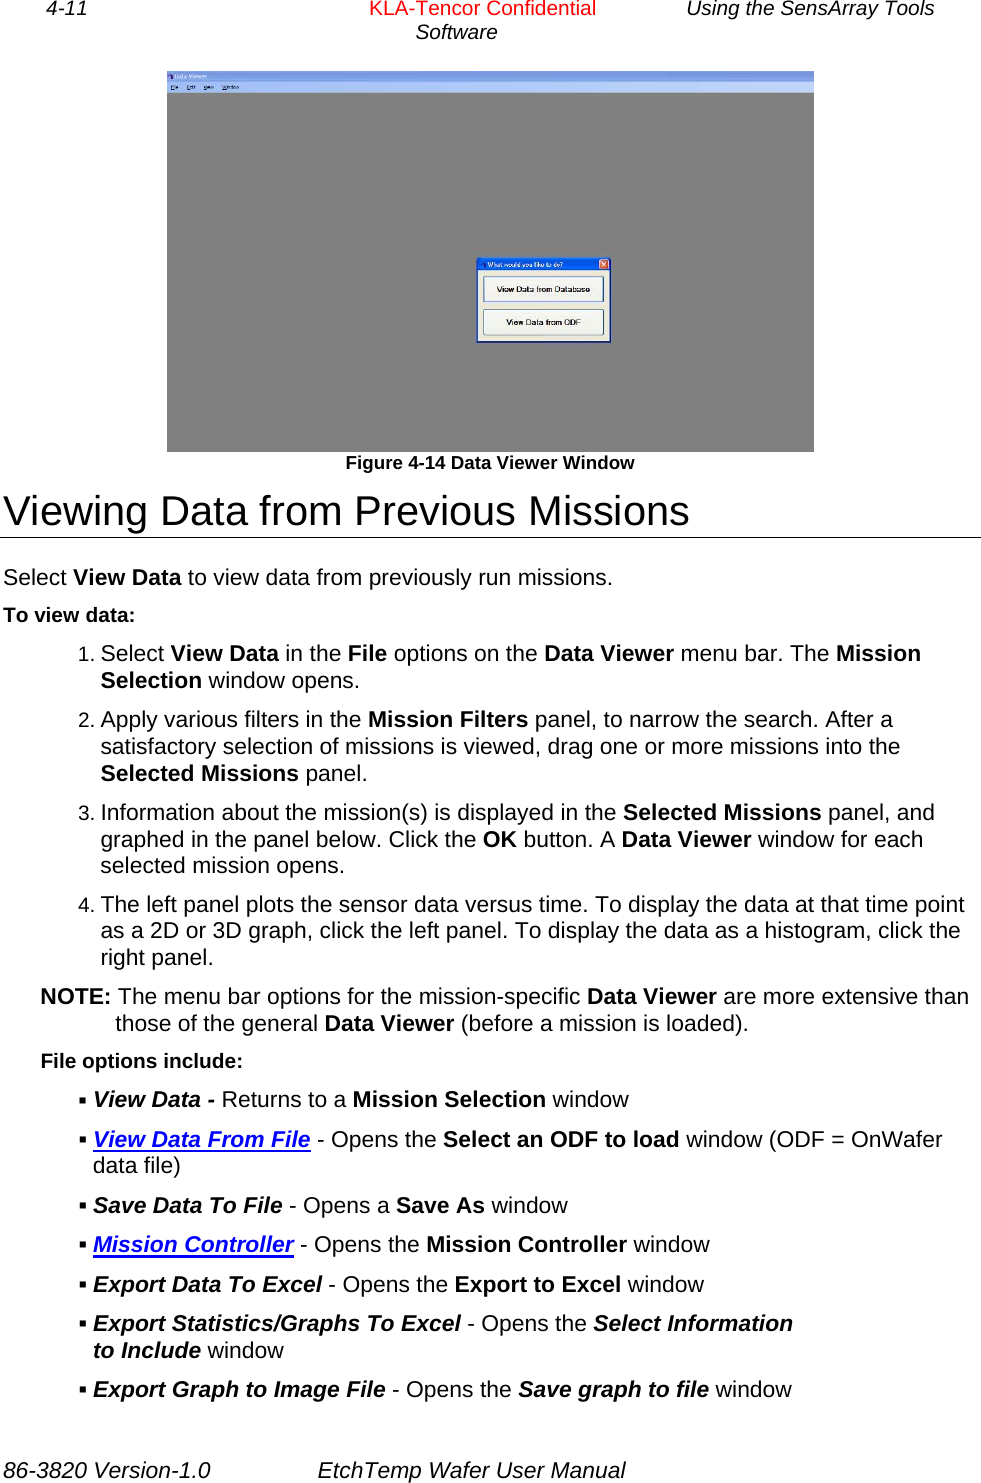 4-11        KLA-Tencor Confidential         Using the SensArray Tools Software   Figure 4-14 Data Viewer Window Viewing Data from Previous Missions Select View Data to view data from previously run missions. To view data: 1. Select View Data in the File options on the Data Viewer menu bar. The Mission Selection window opens. 2. Apply various filters in the Mission Filters panel, to narrow the search. After a satisfactory selection of missions is viewed, drag one or more missions into the Selected Missions panel. 3. Information about the mission(s) is displayed in the Selected Missions panel, and graphed in the panel below. Click the OK button. A Data Viewer window for each selected mission opens. 4. The left panel plots the sensor data versus time. To display the data at that time point as a 2D or 3D graph, click the left panel. To display the data as a histogram, click the right panel. NOTE: The menu bar options for the mission-specific Data Viewer are more extensive than those of the general Data Viewer (before a mission is loaded). File options include:  View Data - Returns to a Mission Selection window  View Data From File - Opens the Select an ODF to load window (ODF = OnWafer data file)  Save Data To File - Opens a Save As window  Mission Controller - Opens the Mission Controller window  Export Data To Excel - Opens the Export to Excel window  Export Statistics/Graphs To Excel - Opens the Select Information to Include window  Export Graph to Image File - Opens the Save graph to file window 86-3820 Version-1.0  EtchTemp Wafer User Manual 